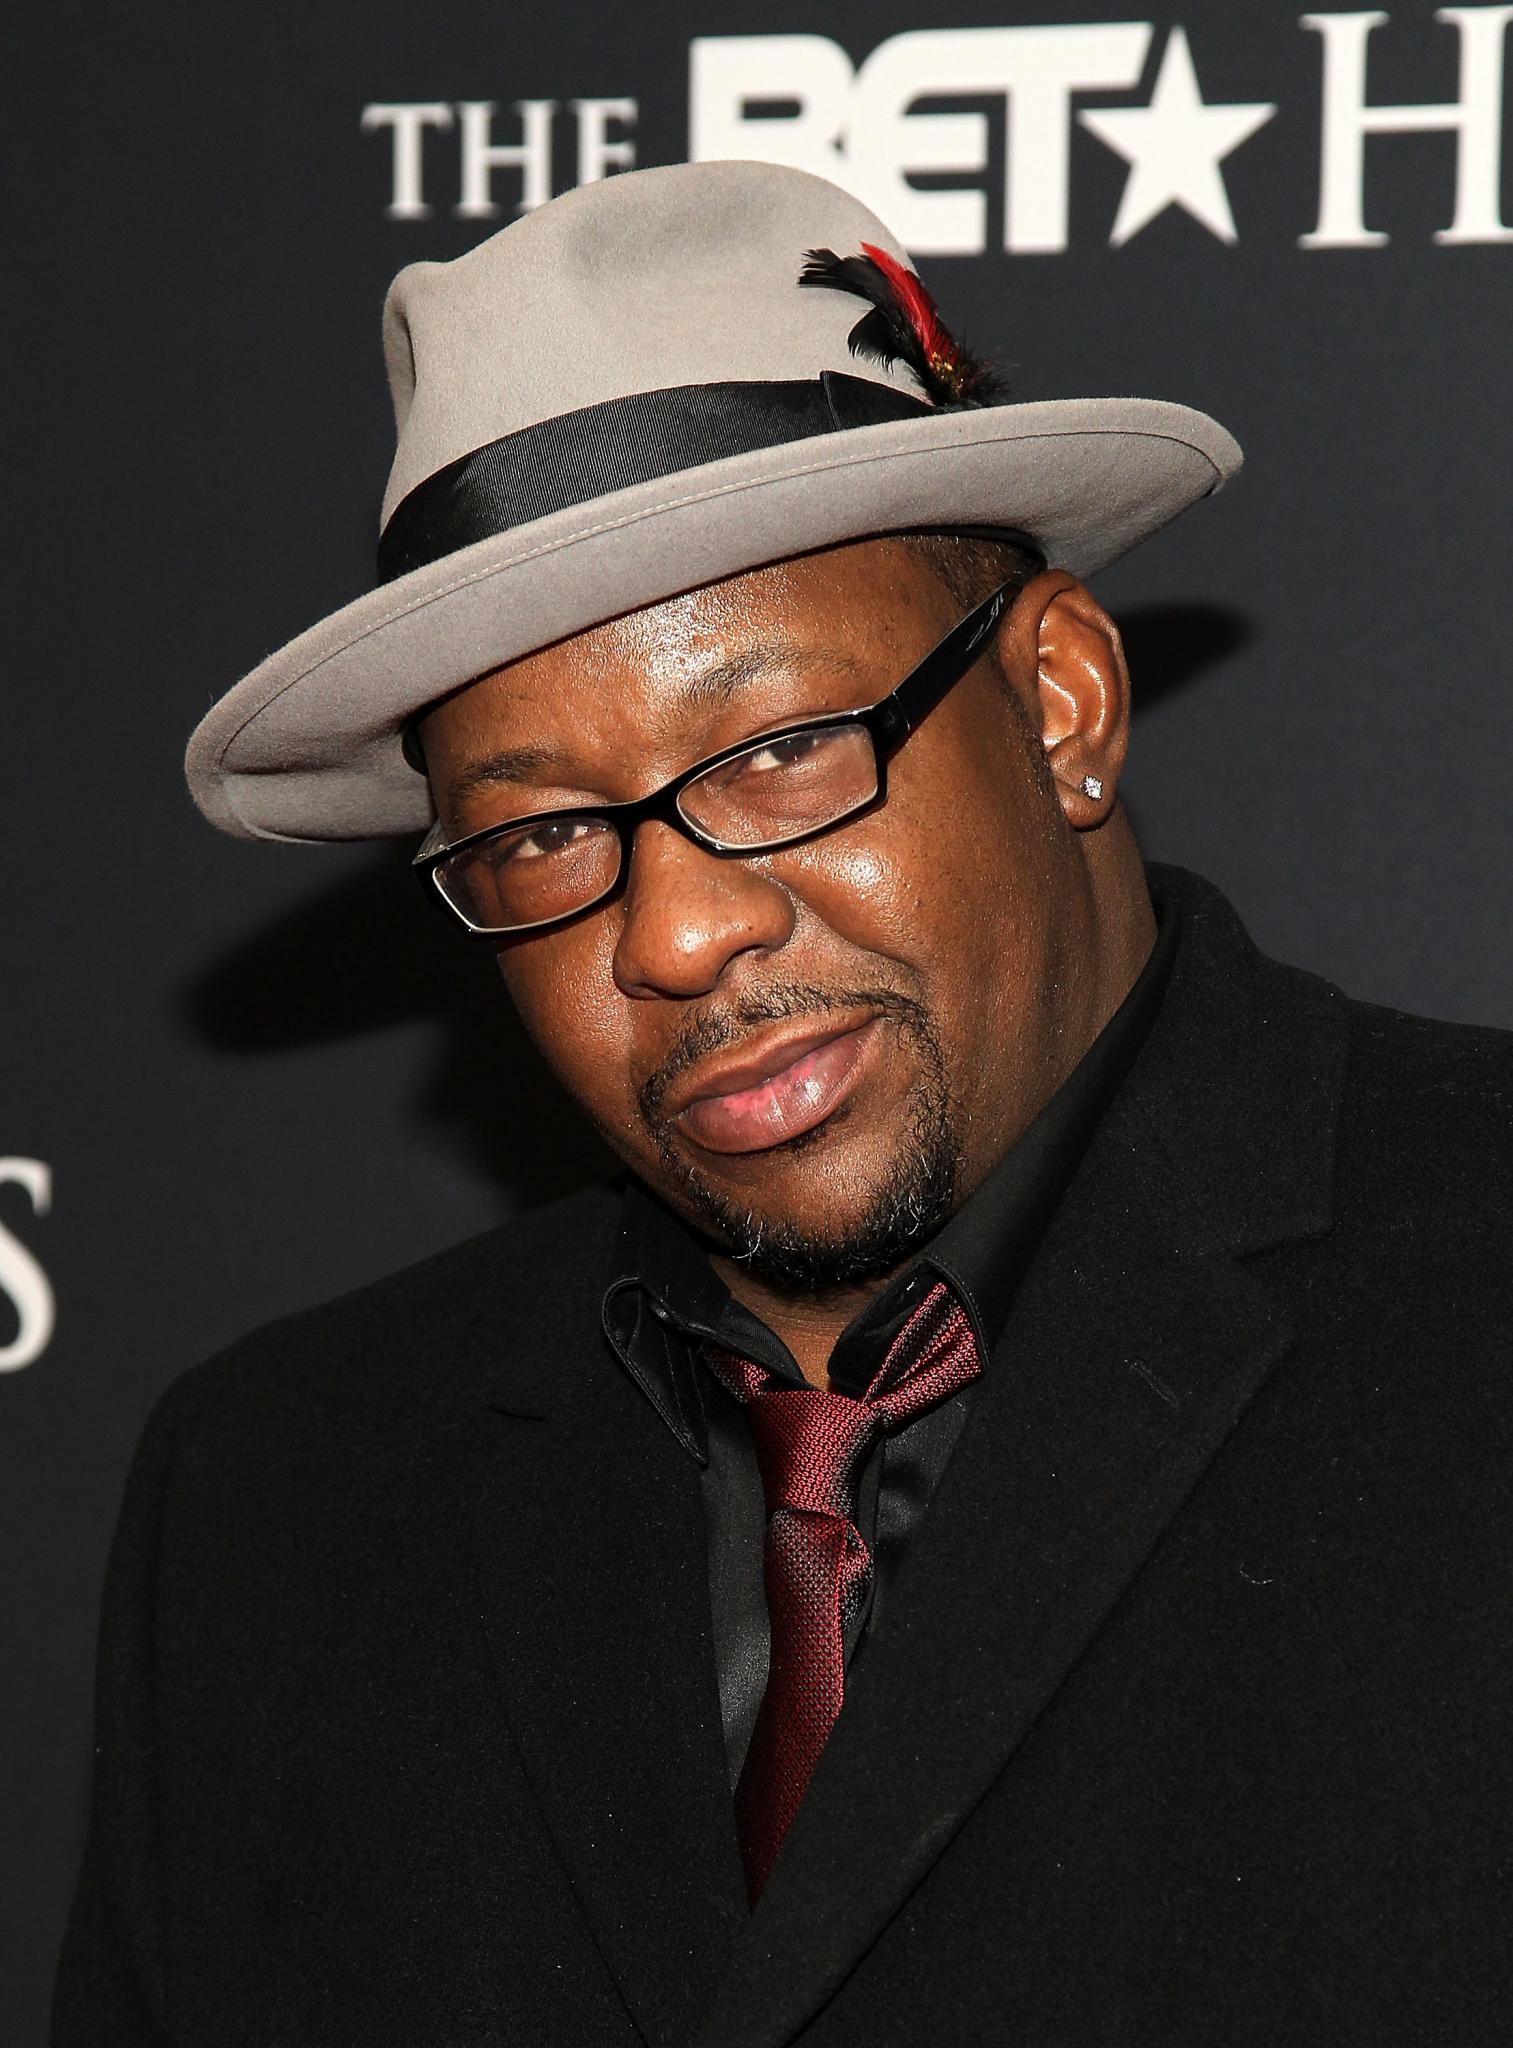 Bobby Brown Gives Emotional Thanks To Fans, Brings Crowd to Tears